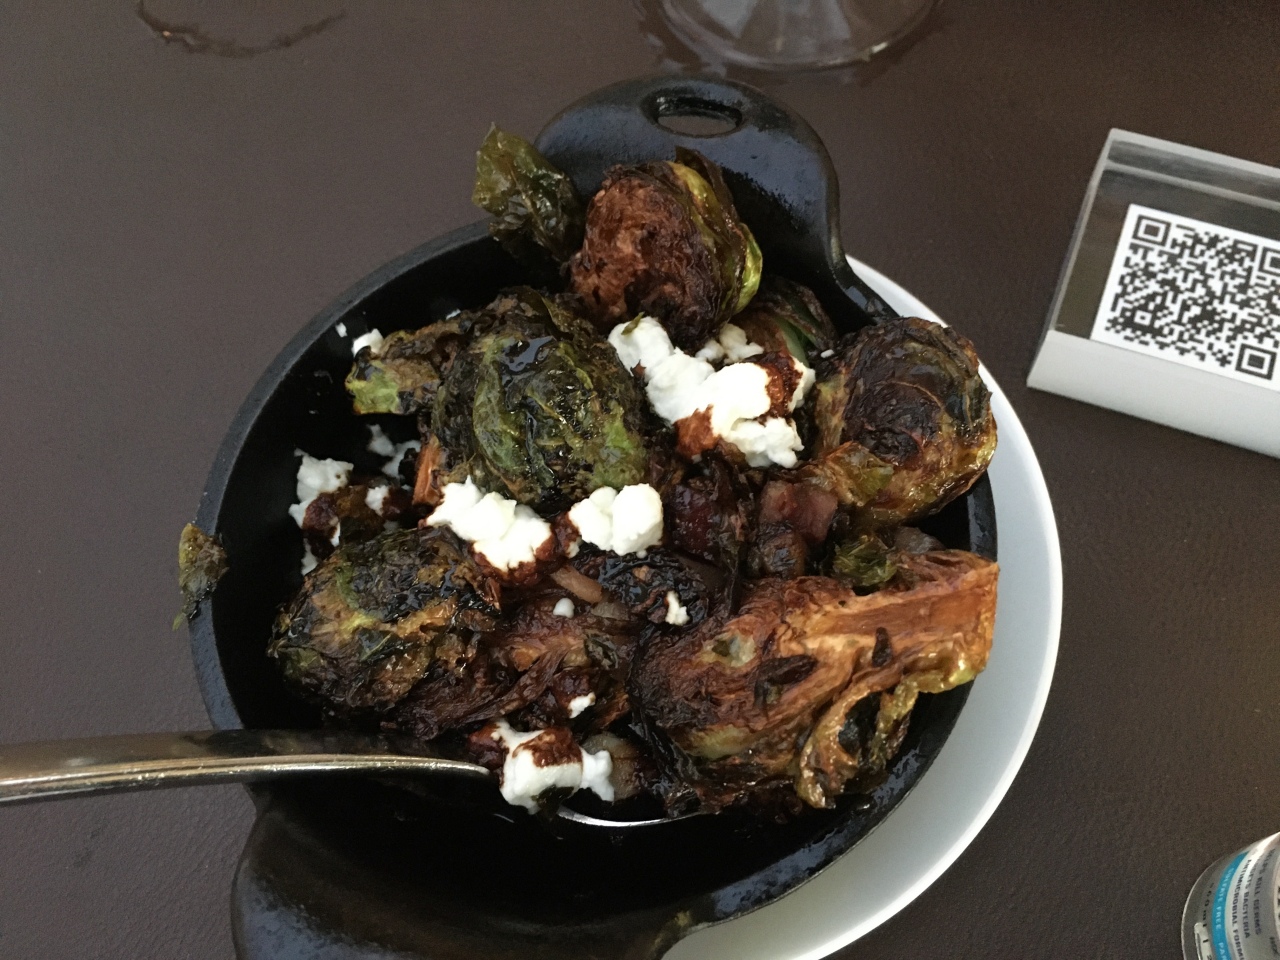 Crispy Brussels Sprouts, DUO, Four Seasons Maui at Wailea